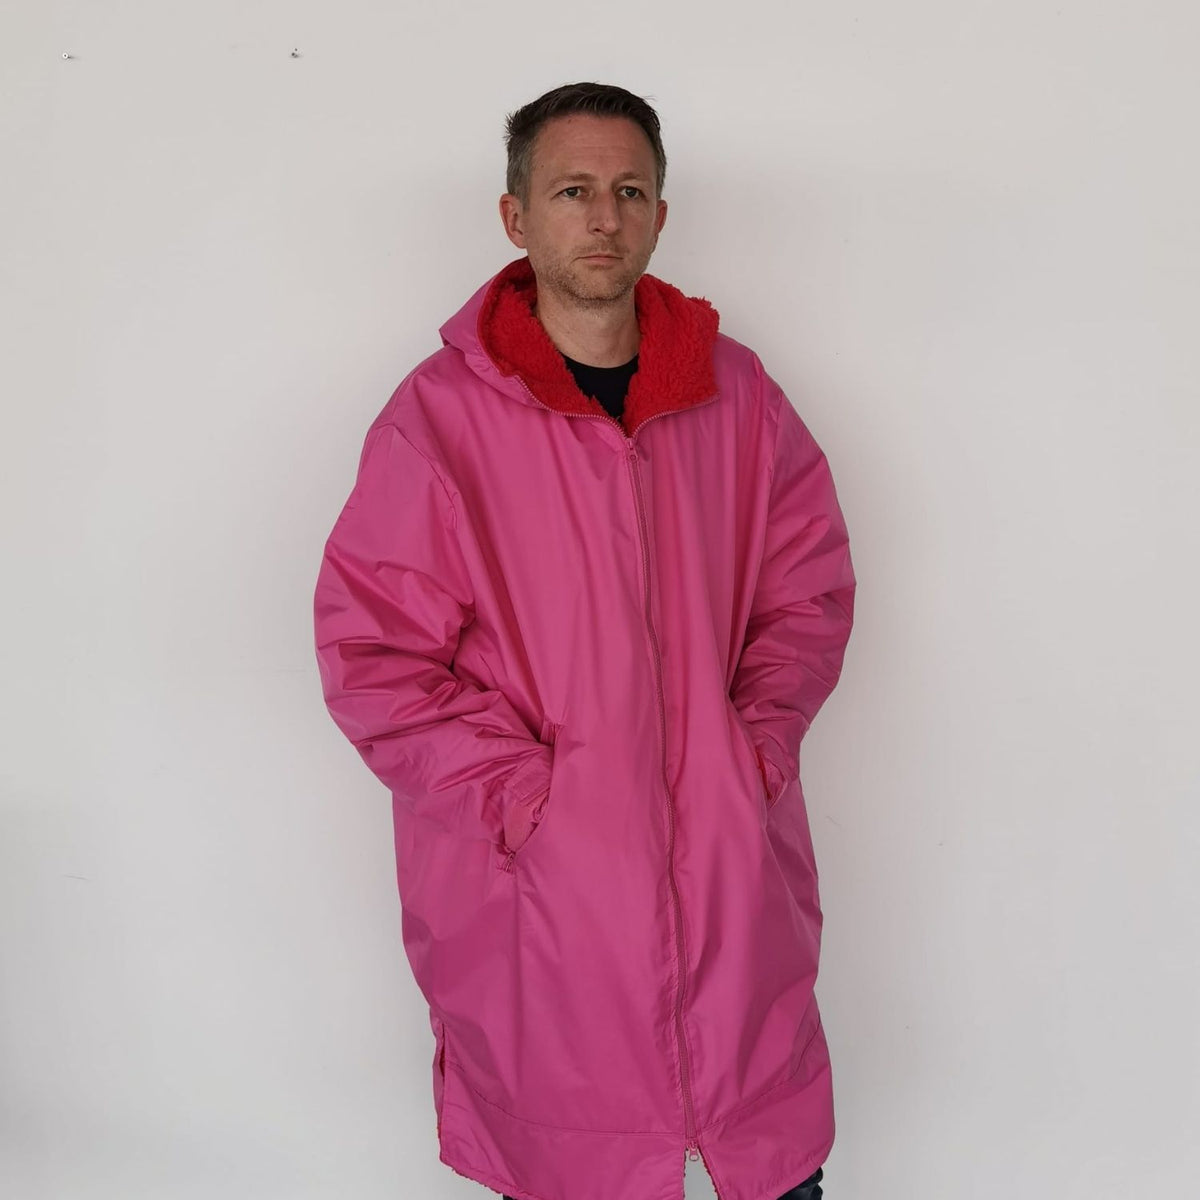 Dry Robe - Pink / Red